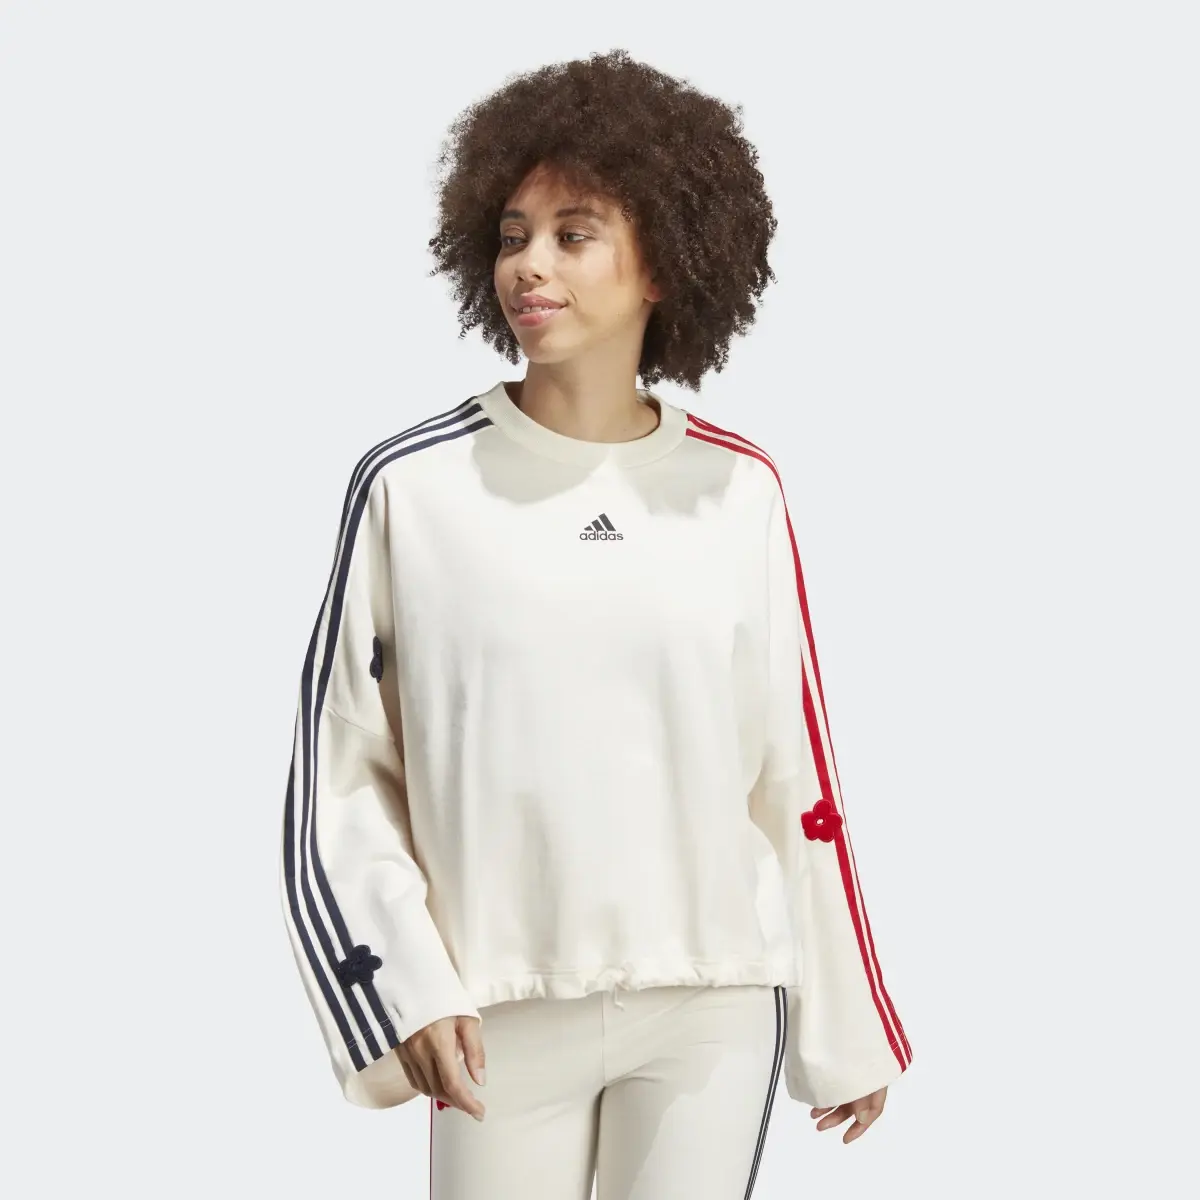 Adidas 3-Stripes Sweatshirt with Chenille Flower Patches. 2